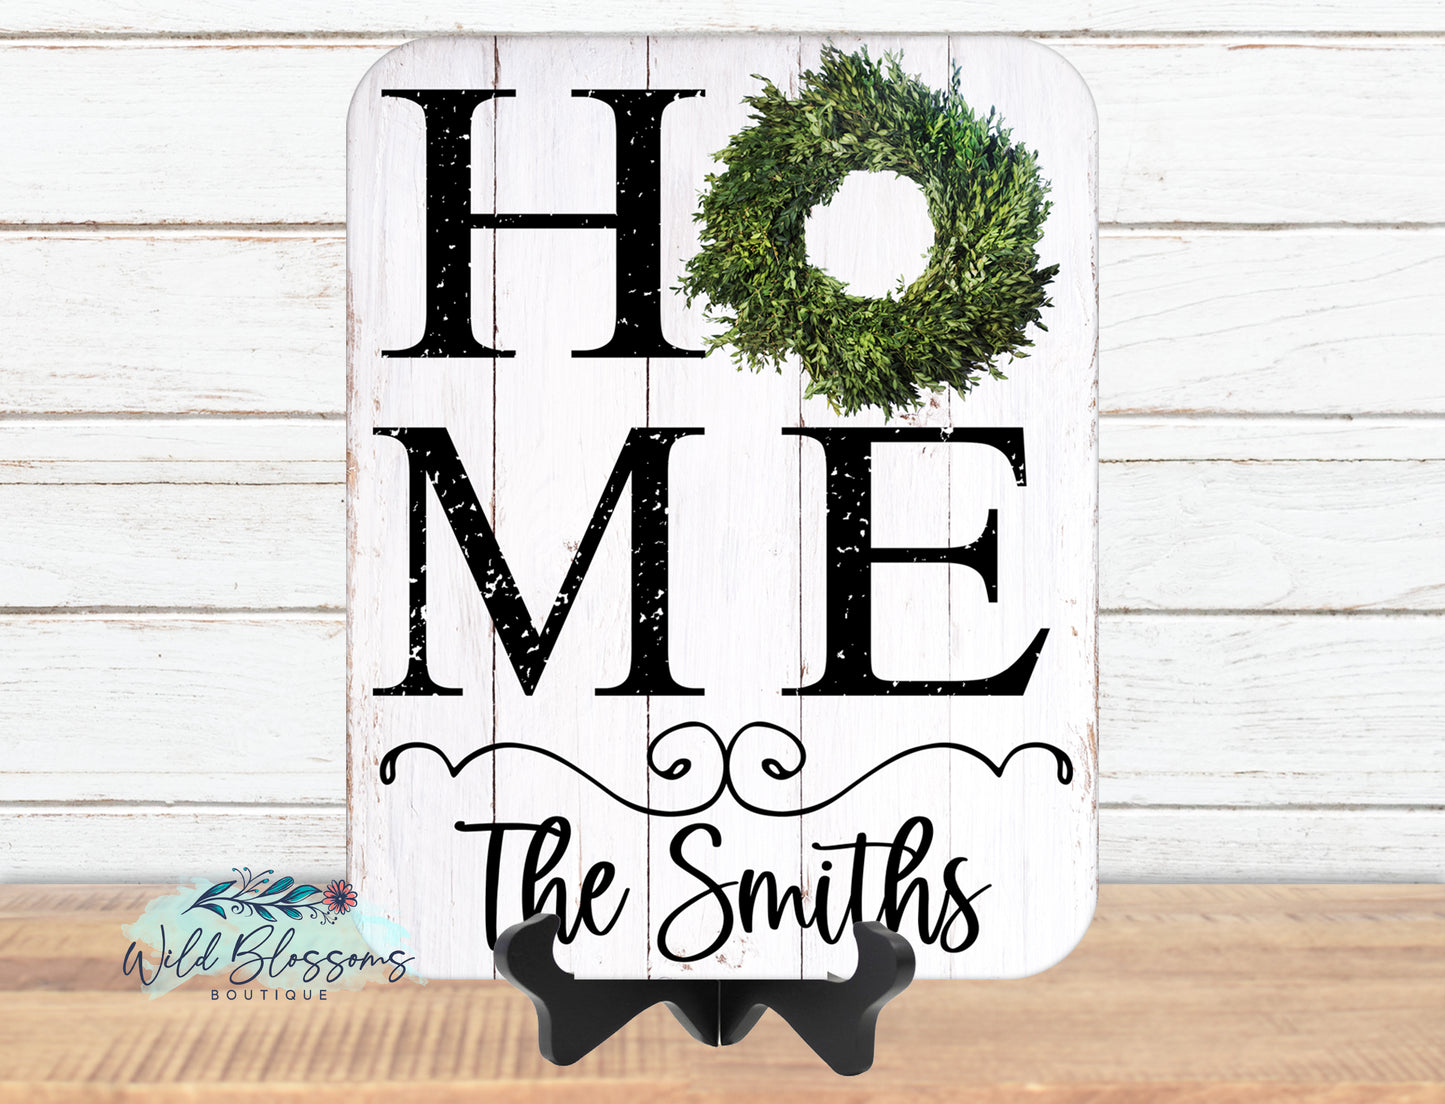 Wooden Home Boxwood Wreath Family Name Sign